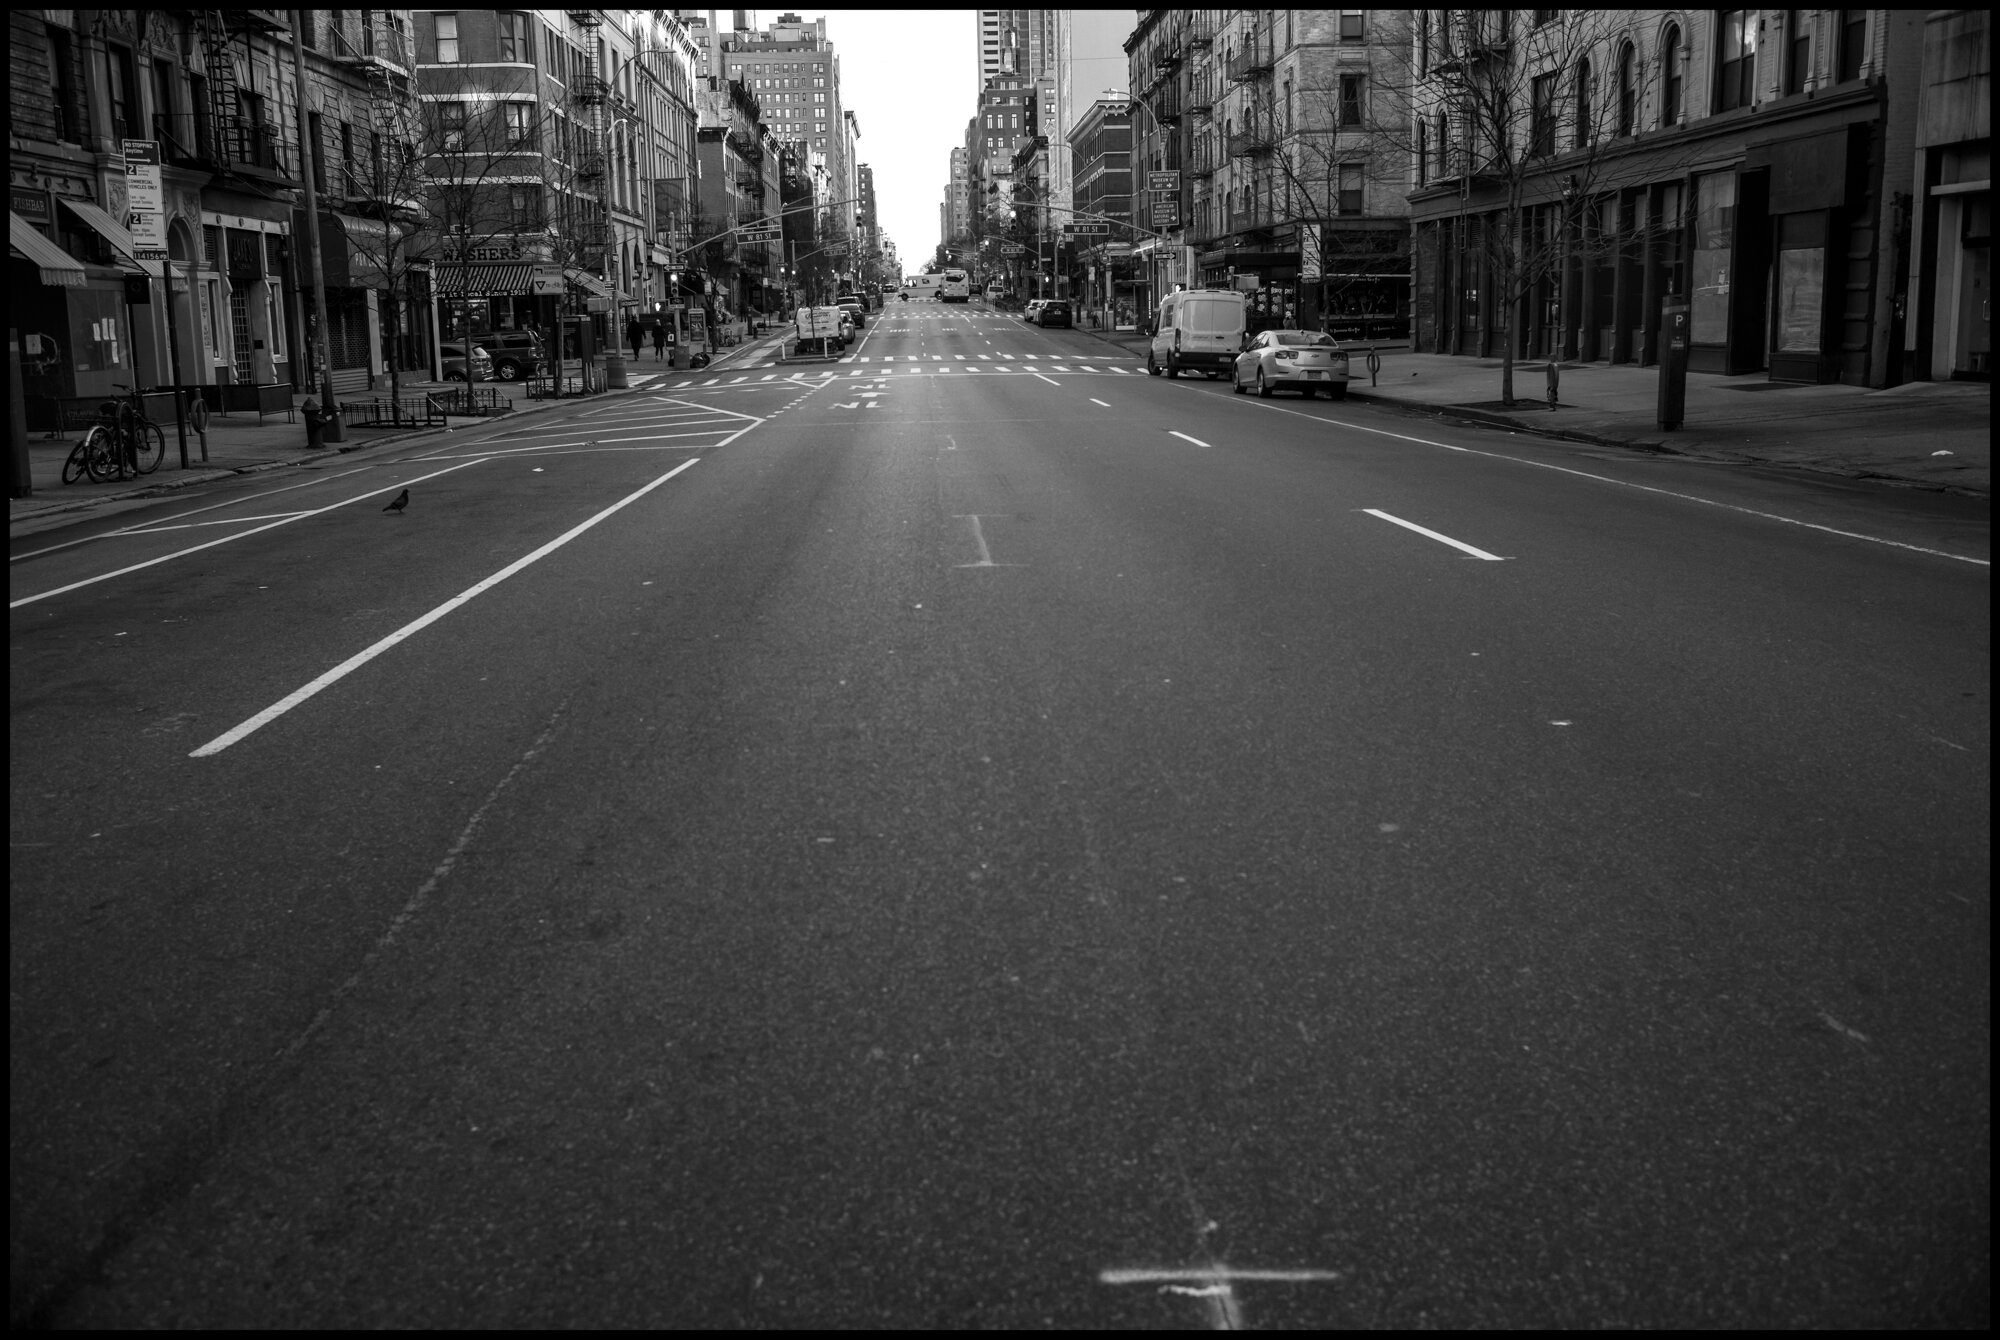  An empty street on Amsterdam Ave. on the Upper Westside. This photograph was made around 8am and usually is very full of traffic and activity on a week day.  March 24, 2020. © Peter Turnley.  ID# 03-009 